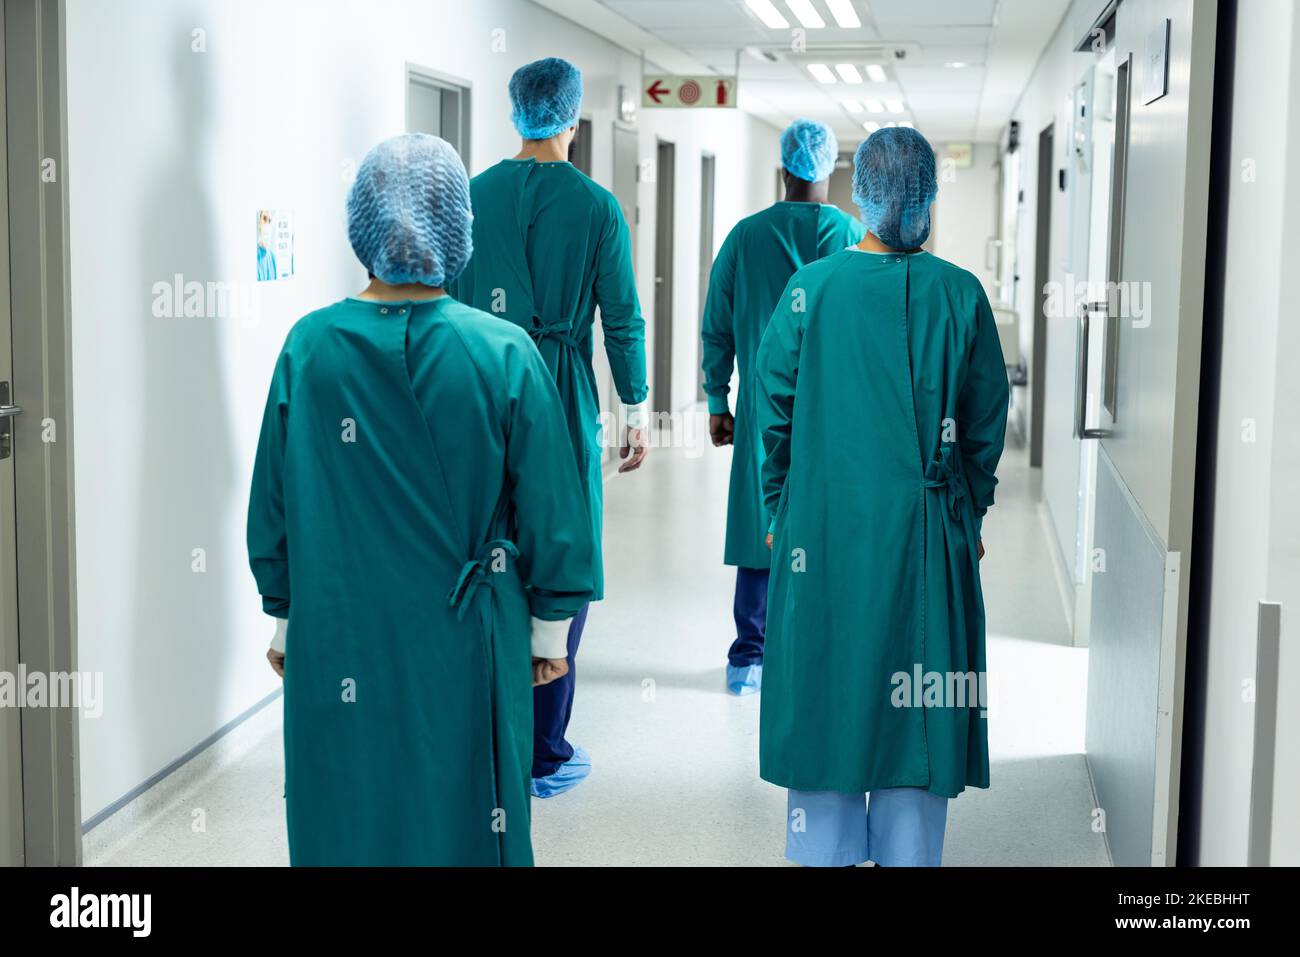 Rear view of four surgeons in surgical caps and gowns walking in hospital corridor Stock Photo